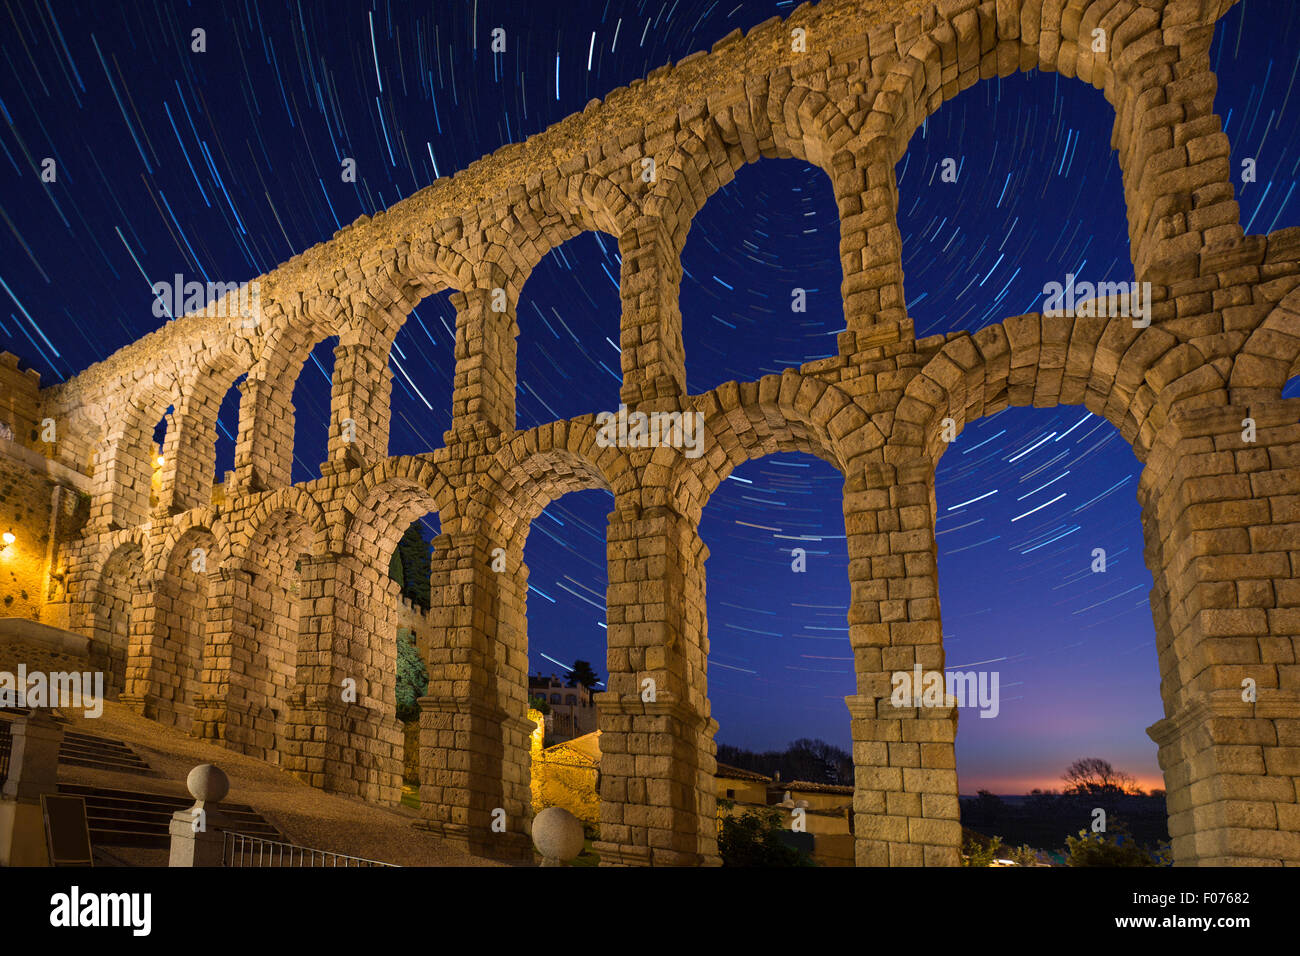 Astronomy - Star Trails and the Roman Aqueduct in the city of Segovia in the Castila and Leon region of central Spain. Stock Photo